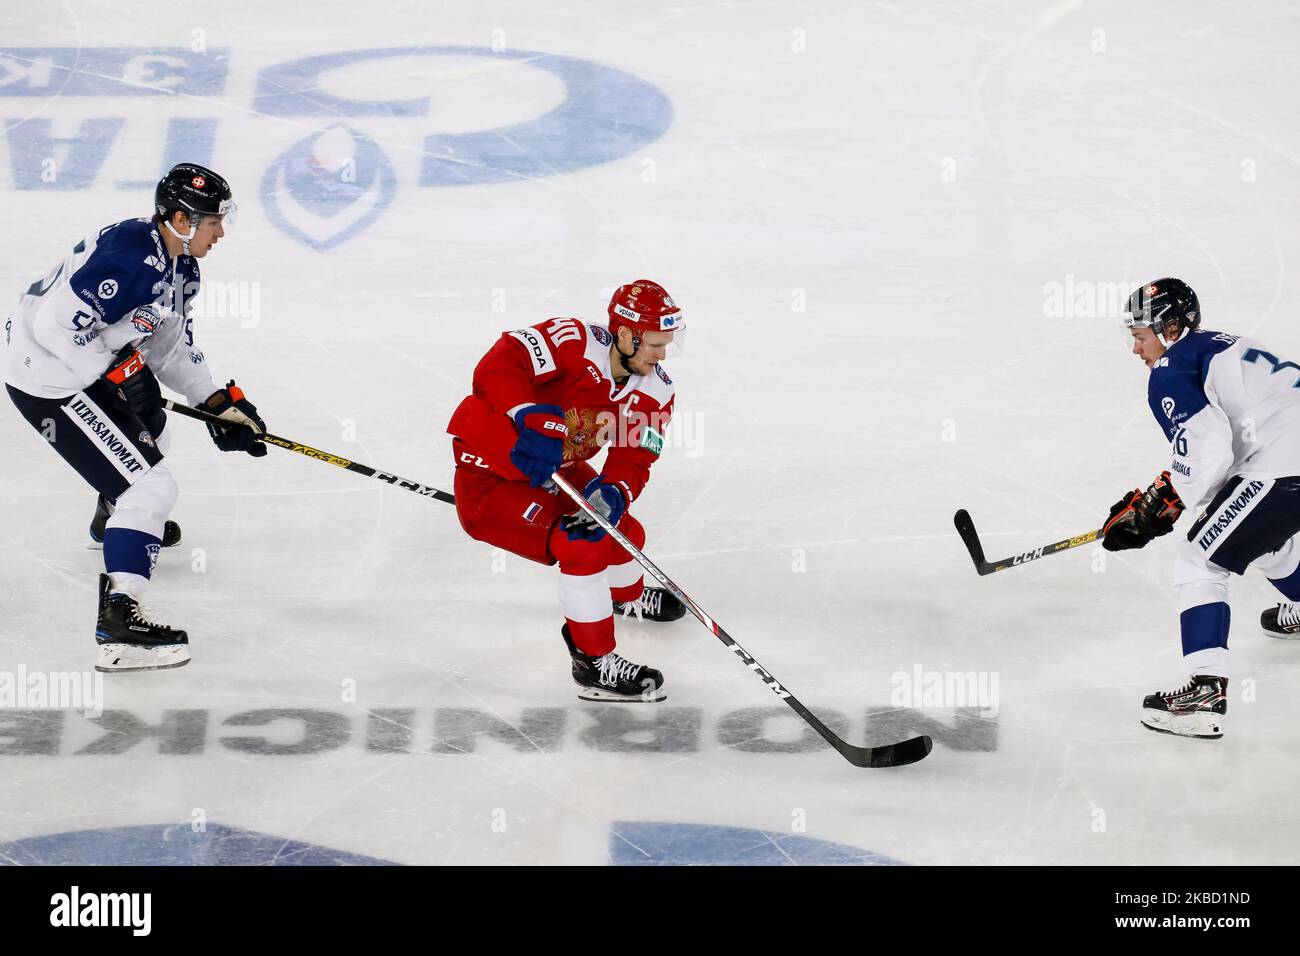 Evgeny Ketov (C) of Russia in action against Miika Koivisto (L) and Elmeri Eronen of Finland during the Euro Hockey Tour Channel One Cup ice hockey match between Russia and Finland on December 15, 2019 at Gazprom Arena in Saint Petersburg, Russia. (Photo by Mike Kireev/NurPhoto) Stock Photo